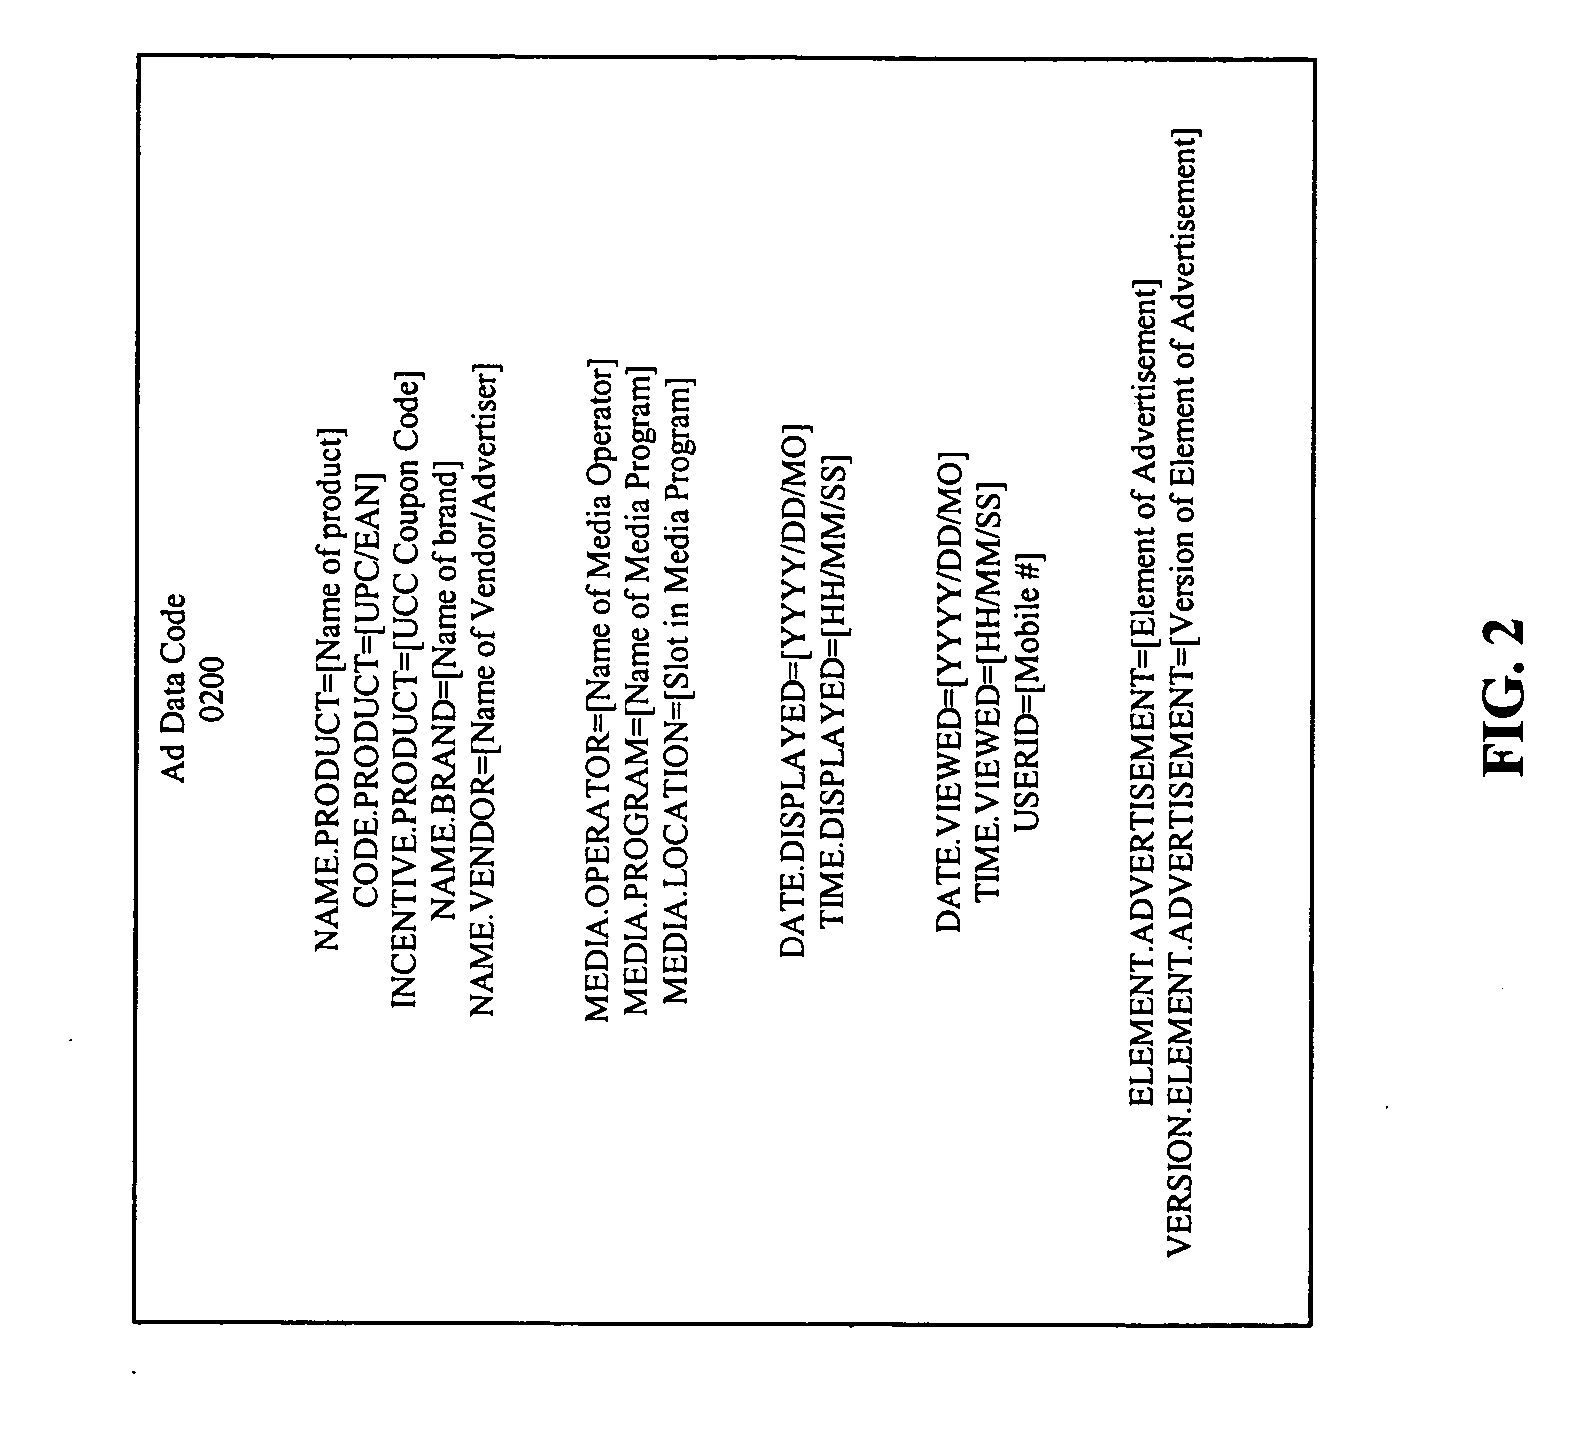 Systems, methods, and computer program products for enabling an advertiser to measure user viewing of and response to an advertisement